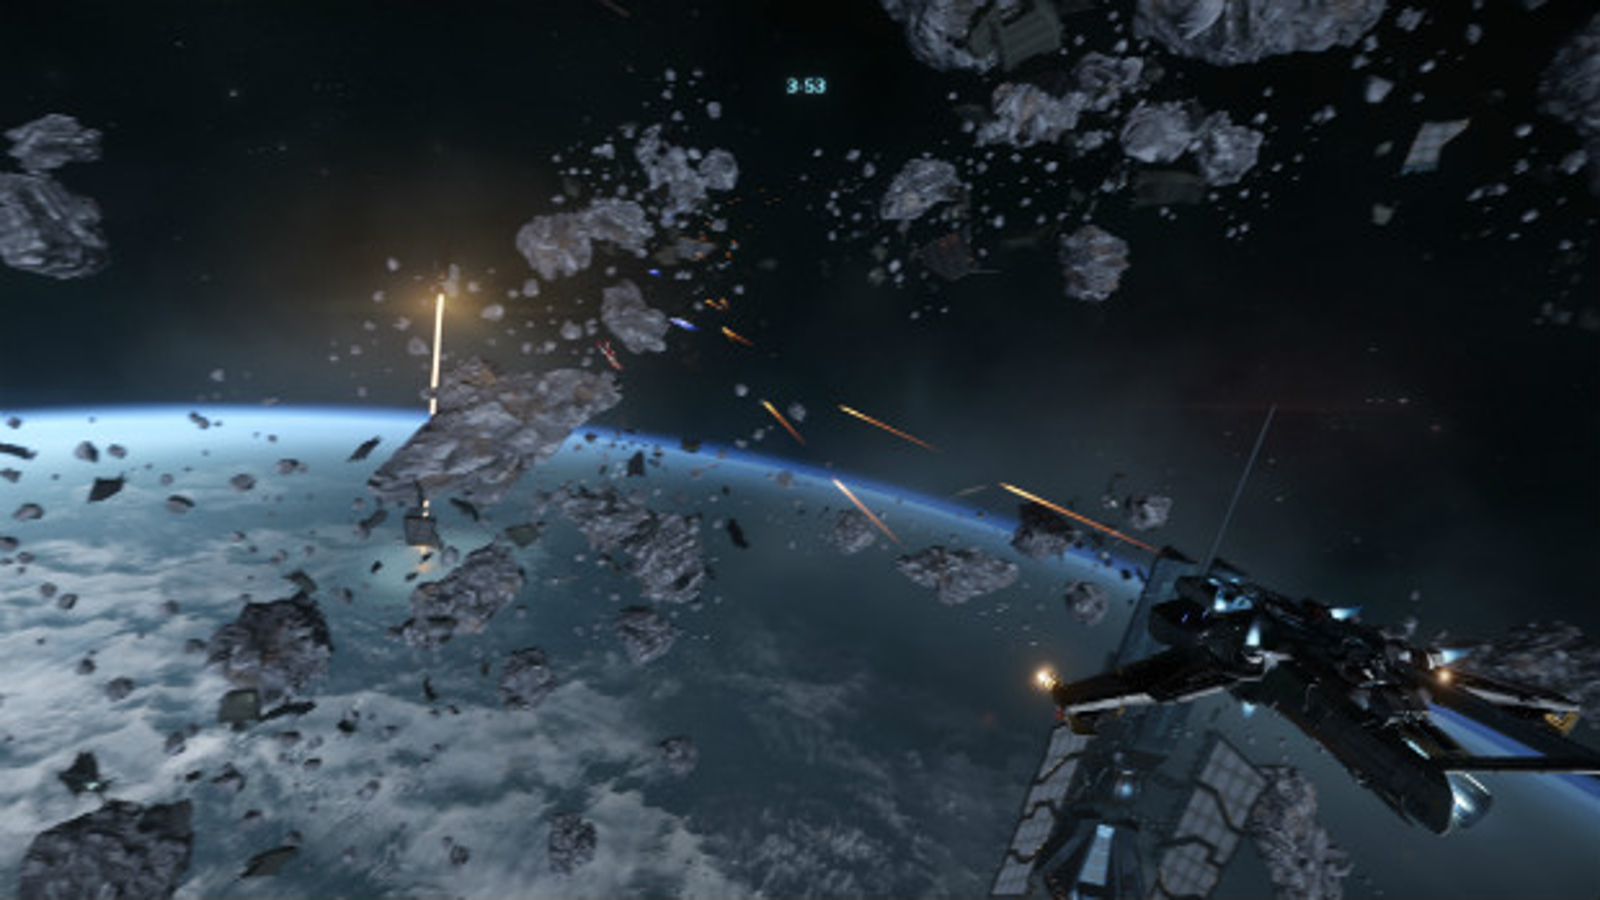 Star Citizen Raises Over $100 Million by Crowdfunding